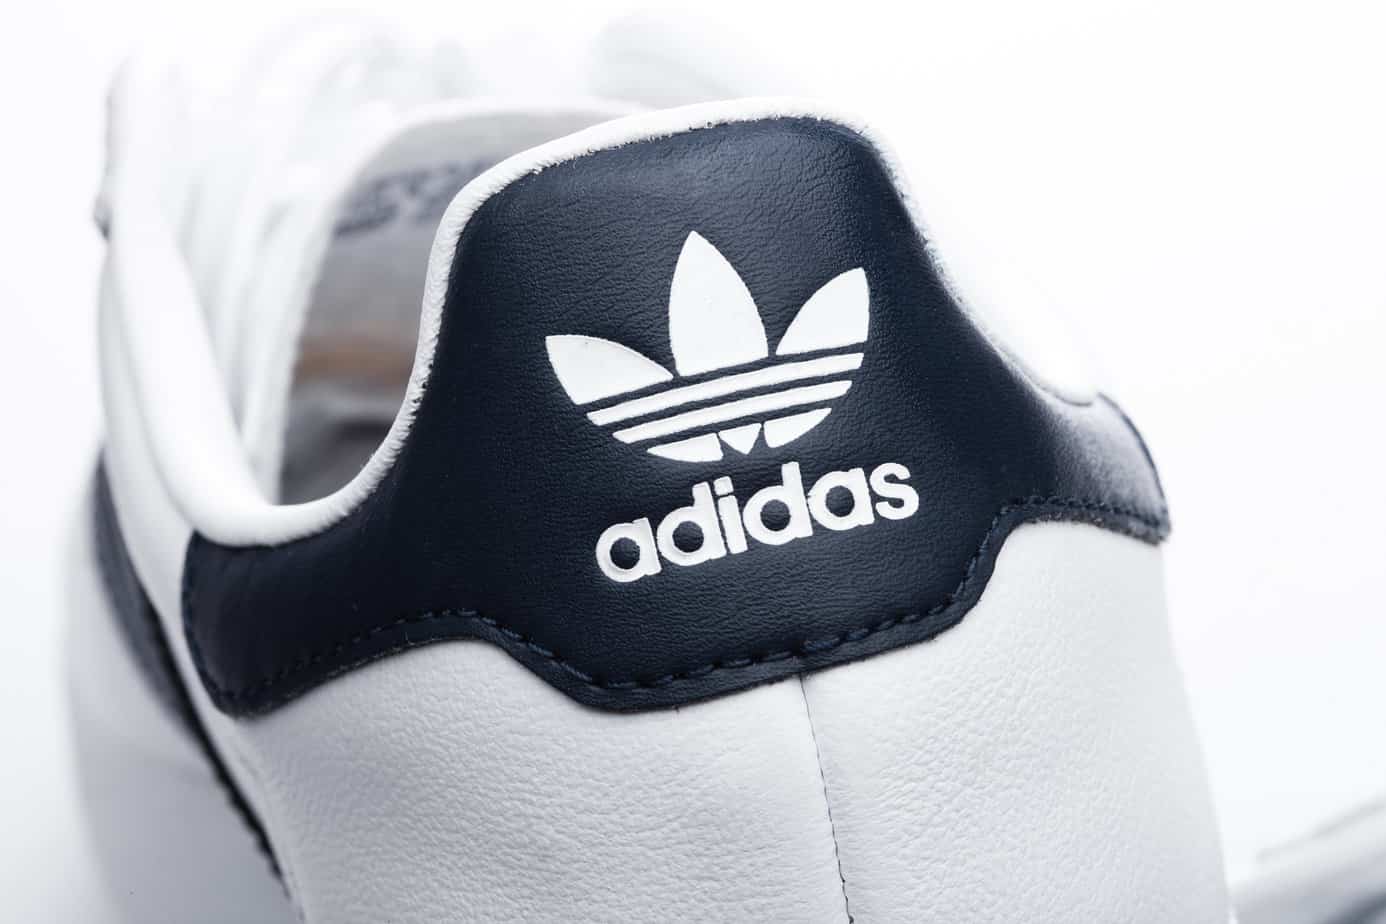 5 Types of Leather Adidas Uses For Shoes (Explained)